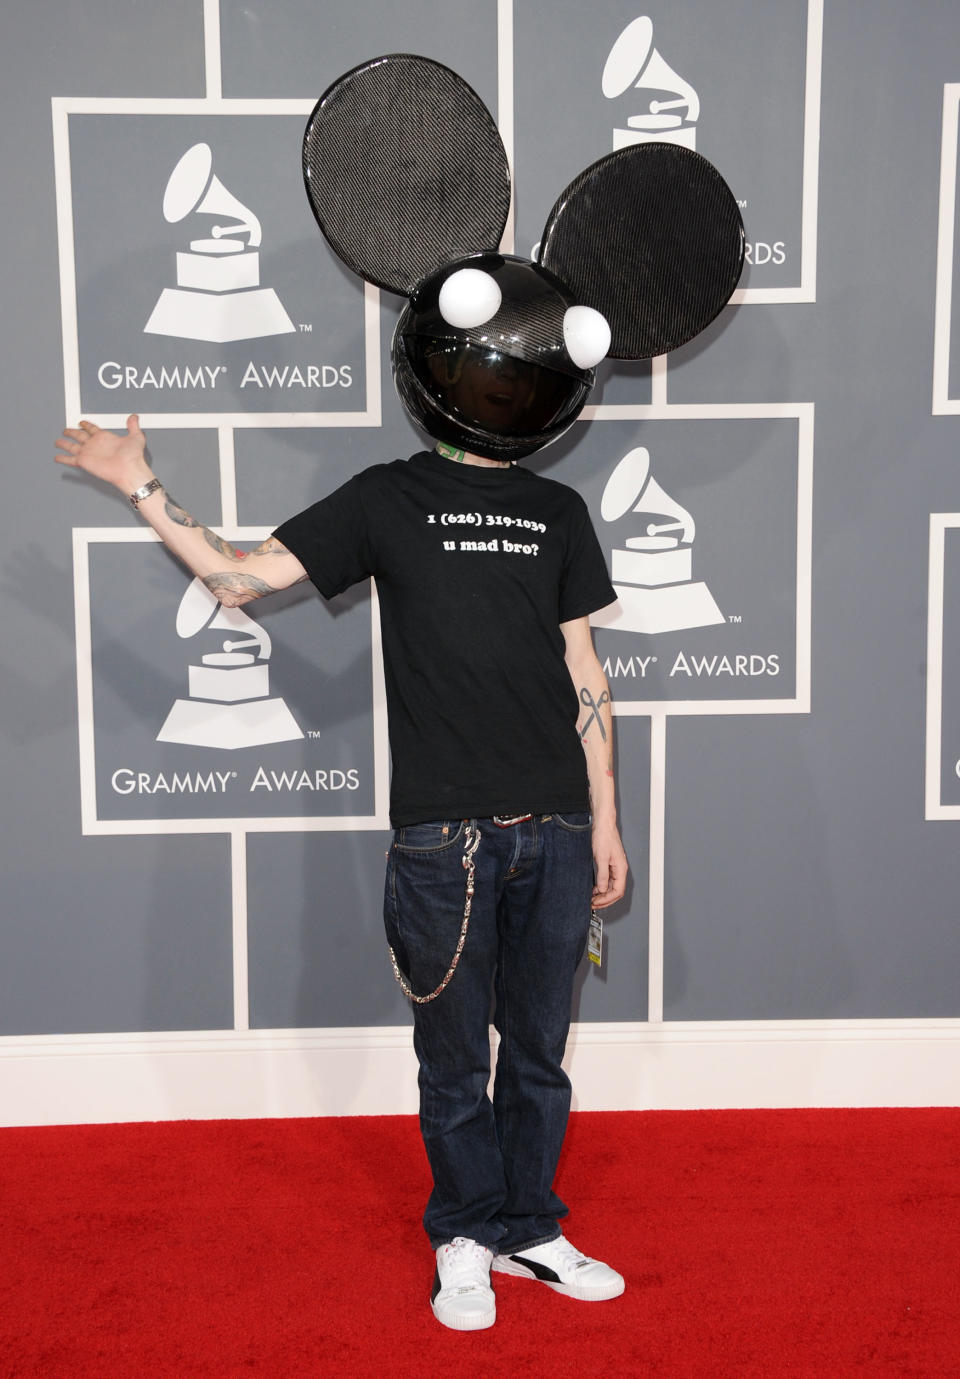 LOS ANGELES, CA - FEBRUARY 12: DJ Deadmau5 arrives at the 54th Annual GRAMMY Awards held at Staples Center on February 12, 2012 in Los Angeles, California. (Photo by Jason Merritt/Getty Images)